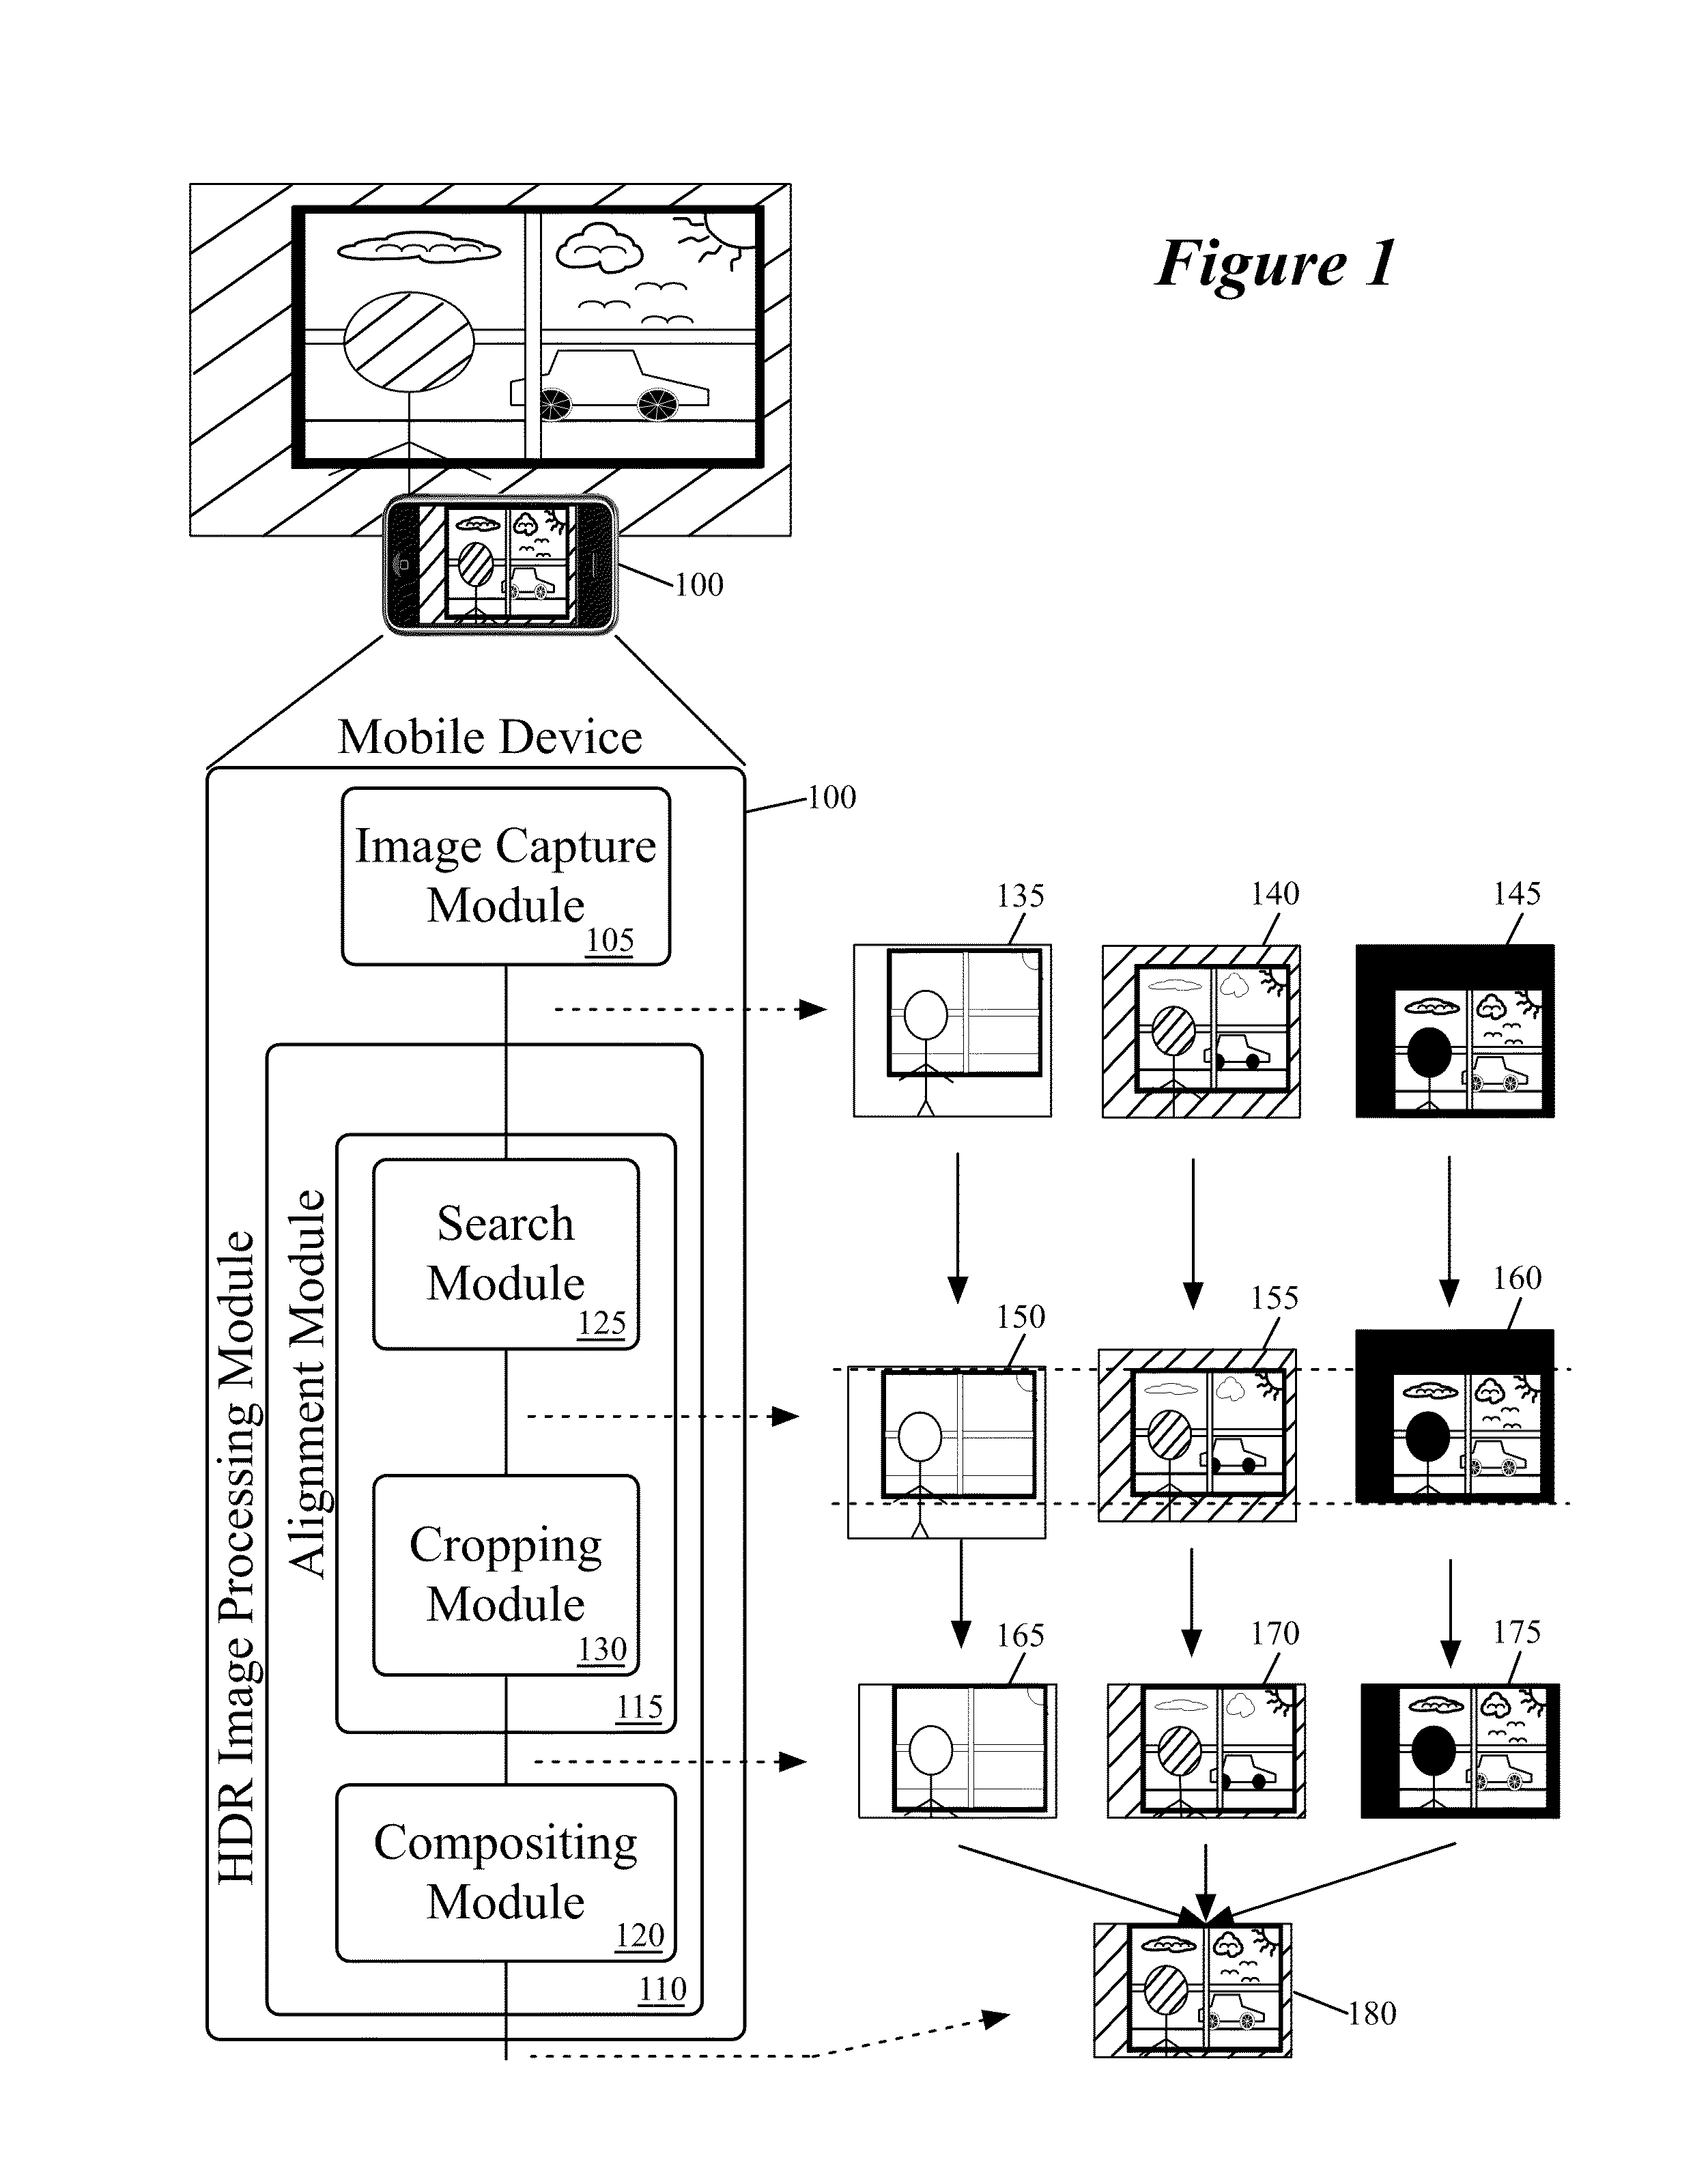 Operating a Device to Capture High Dynamic Range Images